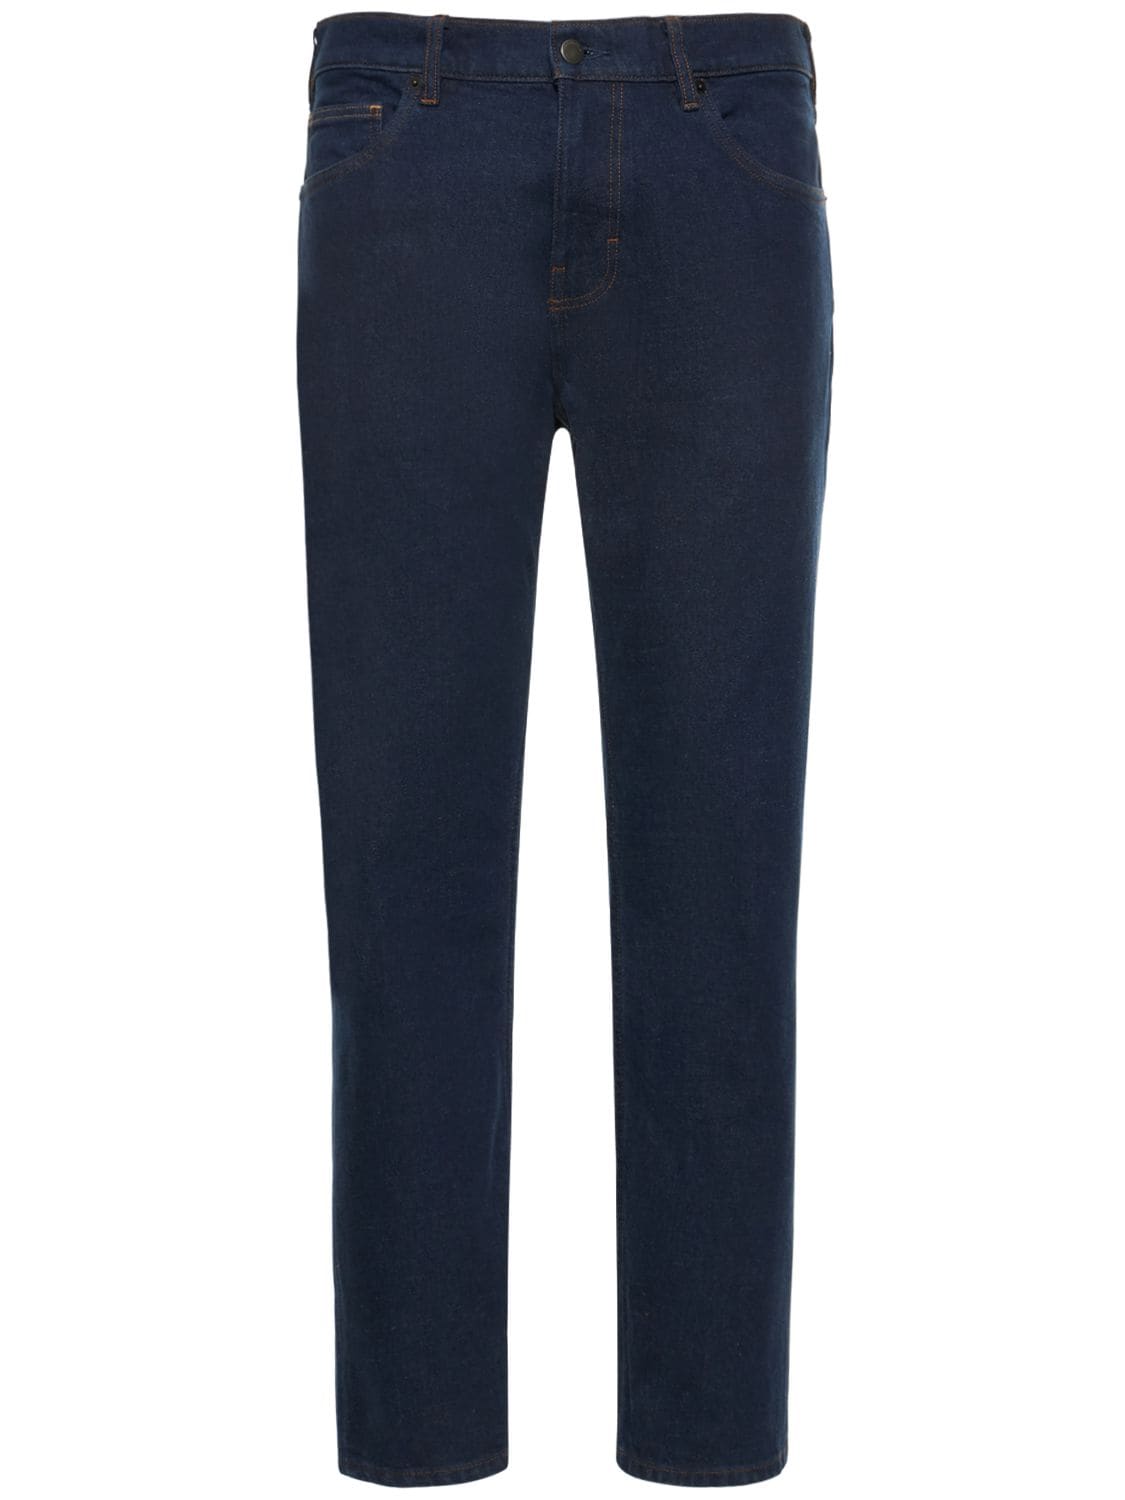 Straight Fit Organic Cotton Jeans